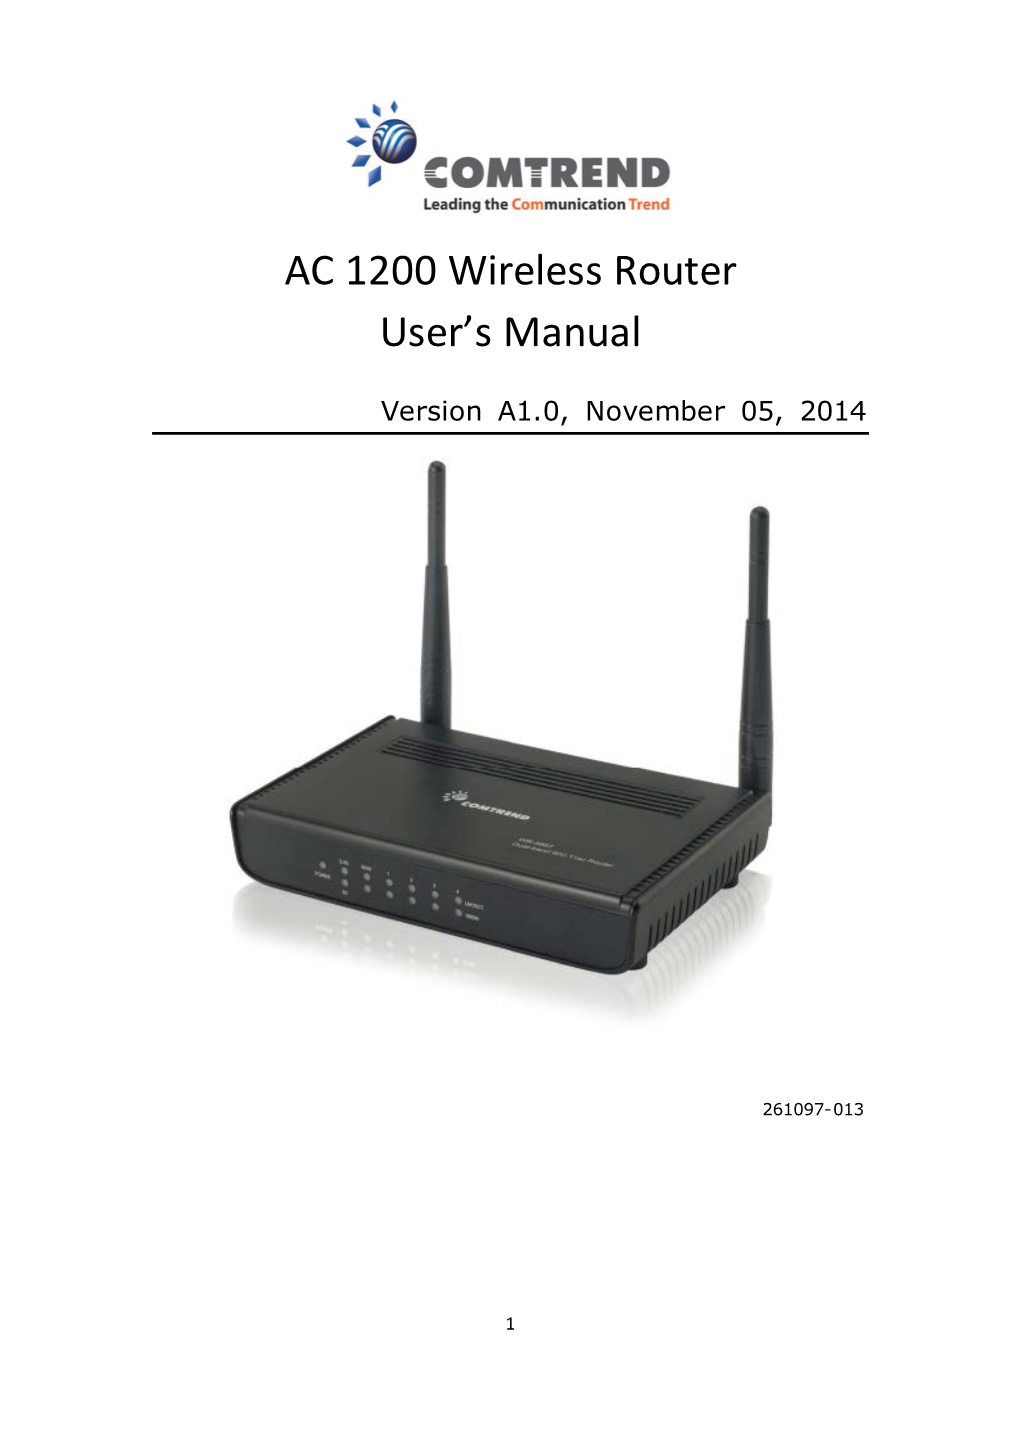 AC 1200 Wireless Router User's Manual